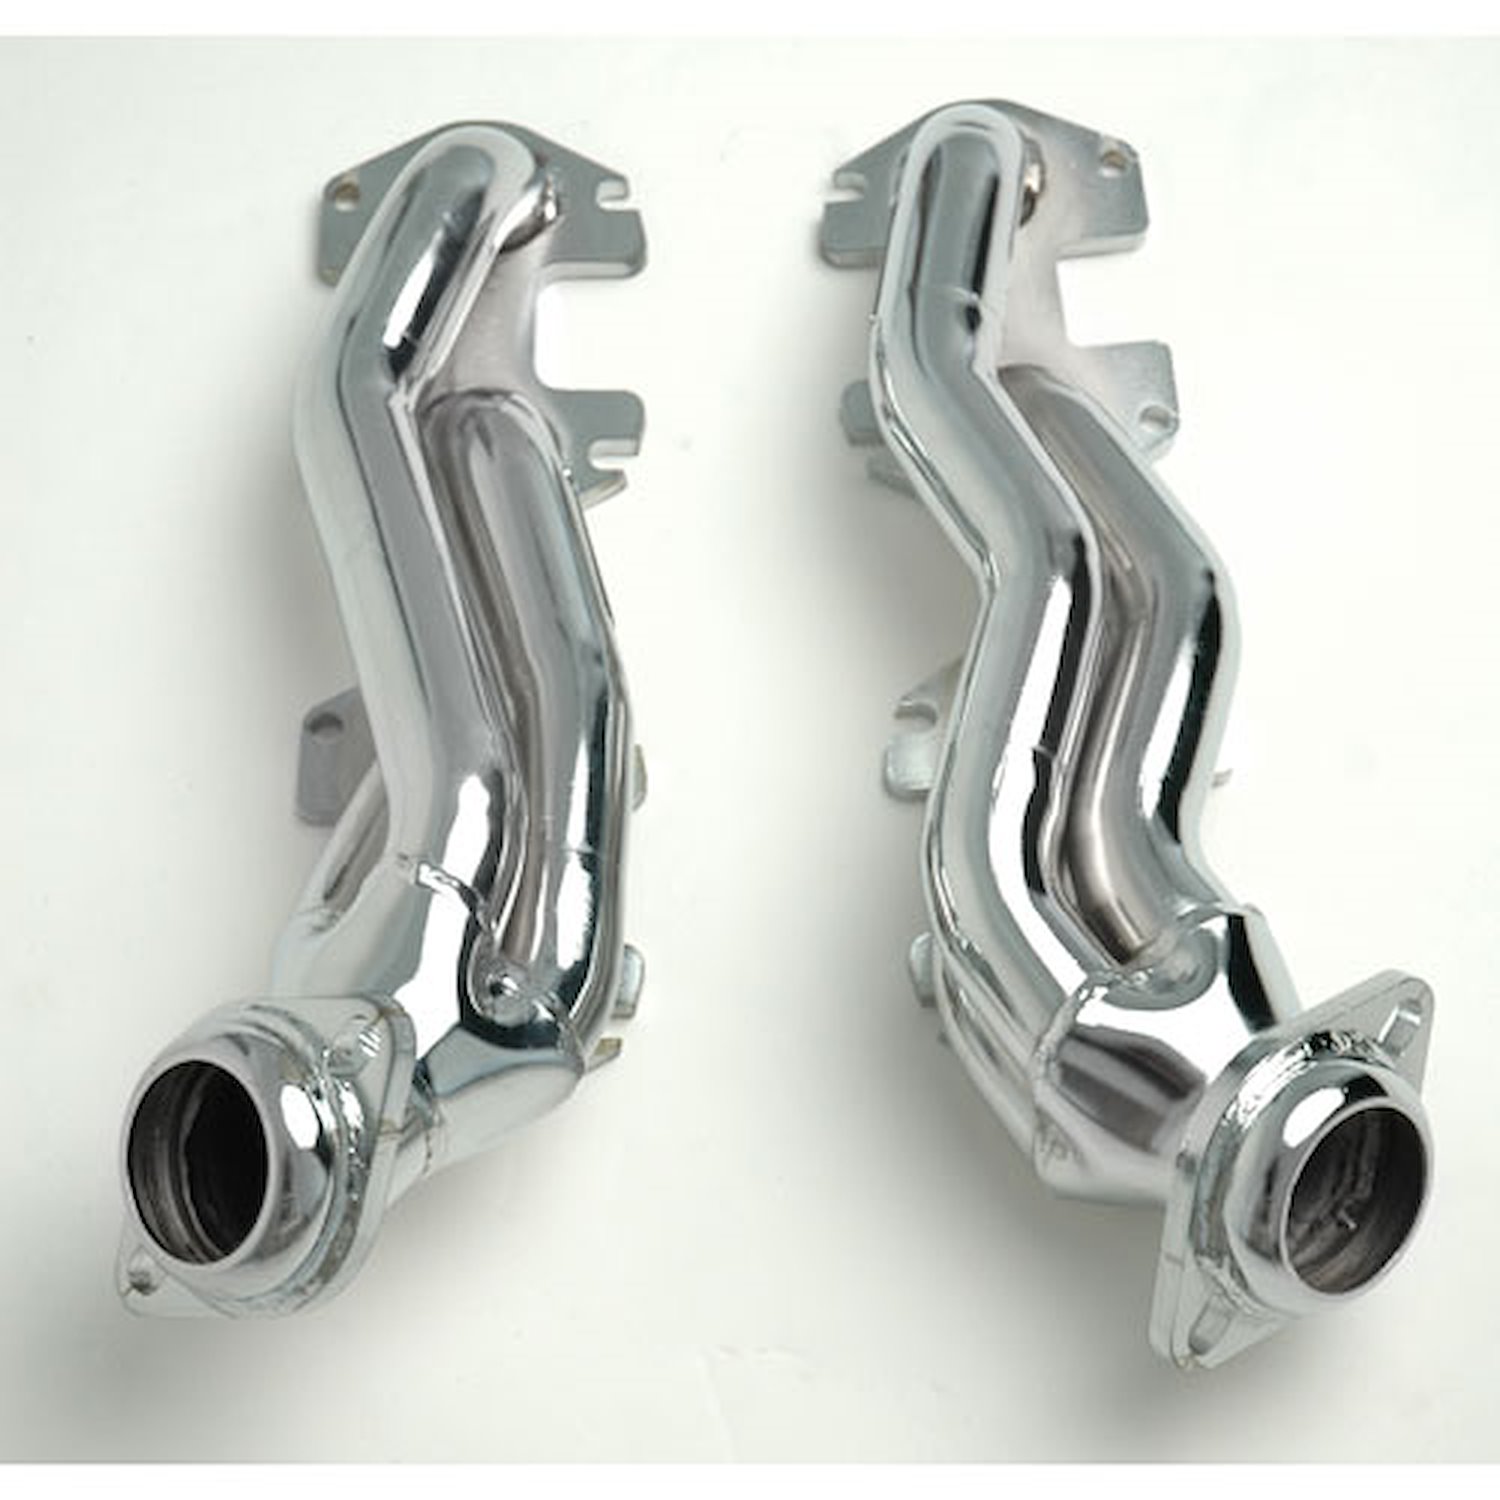 Ceramic Coated Stainless Steel Truck Headers 2006-10 Expedition